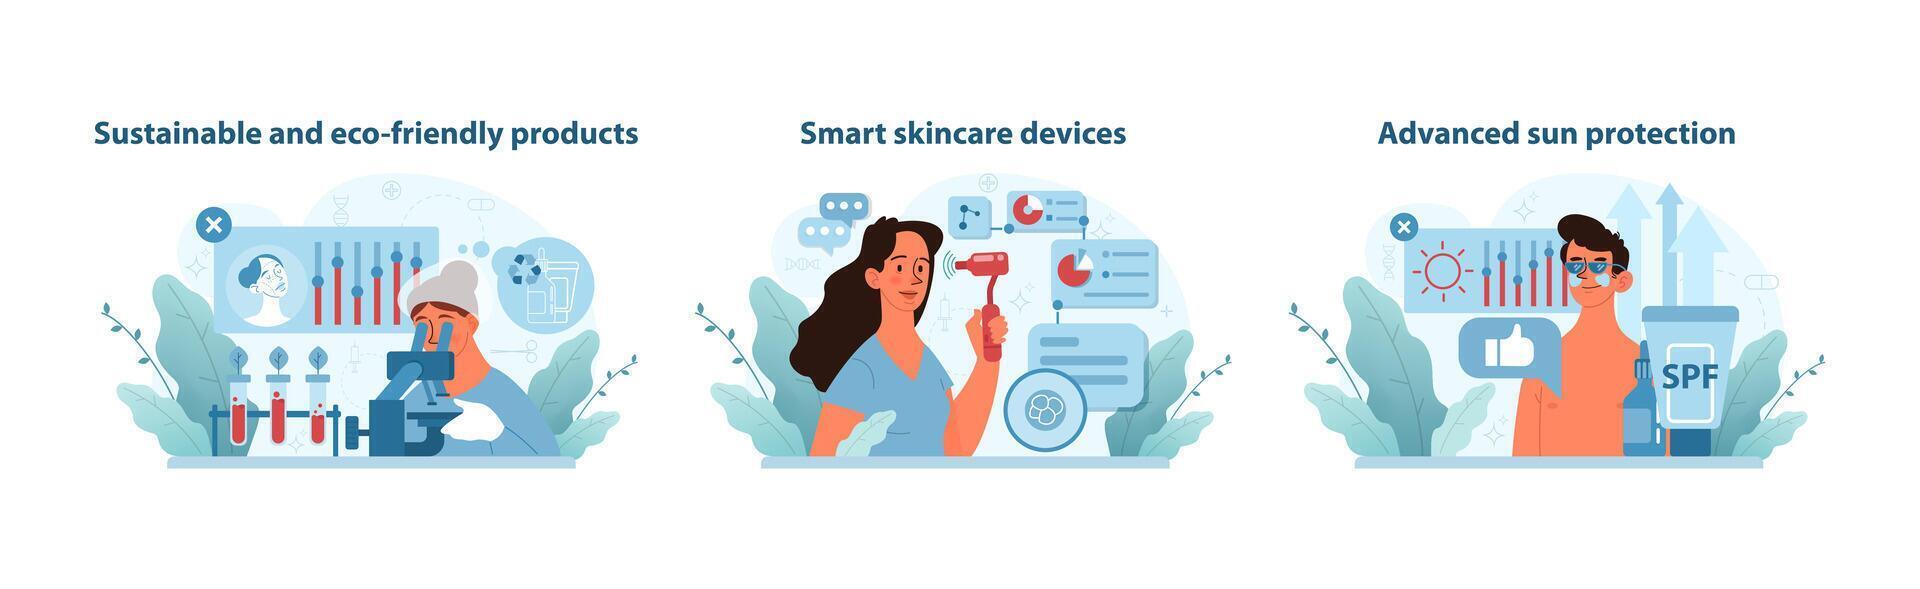 Skincare innovation triptych. Eco-conscious products, smart devices. vector